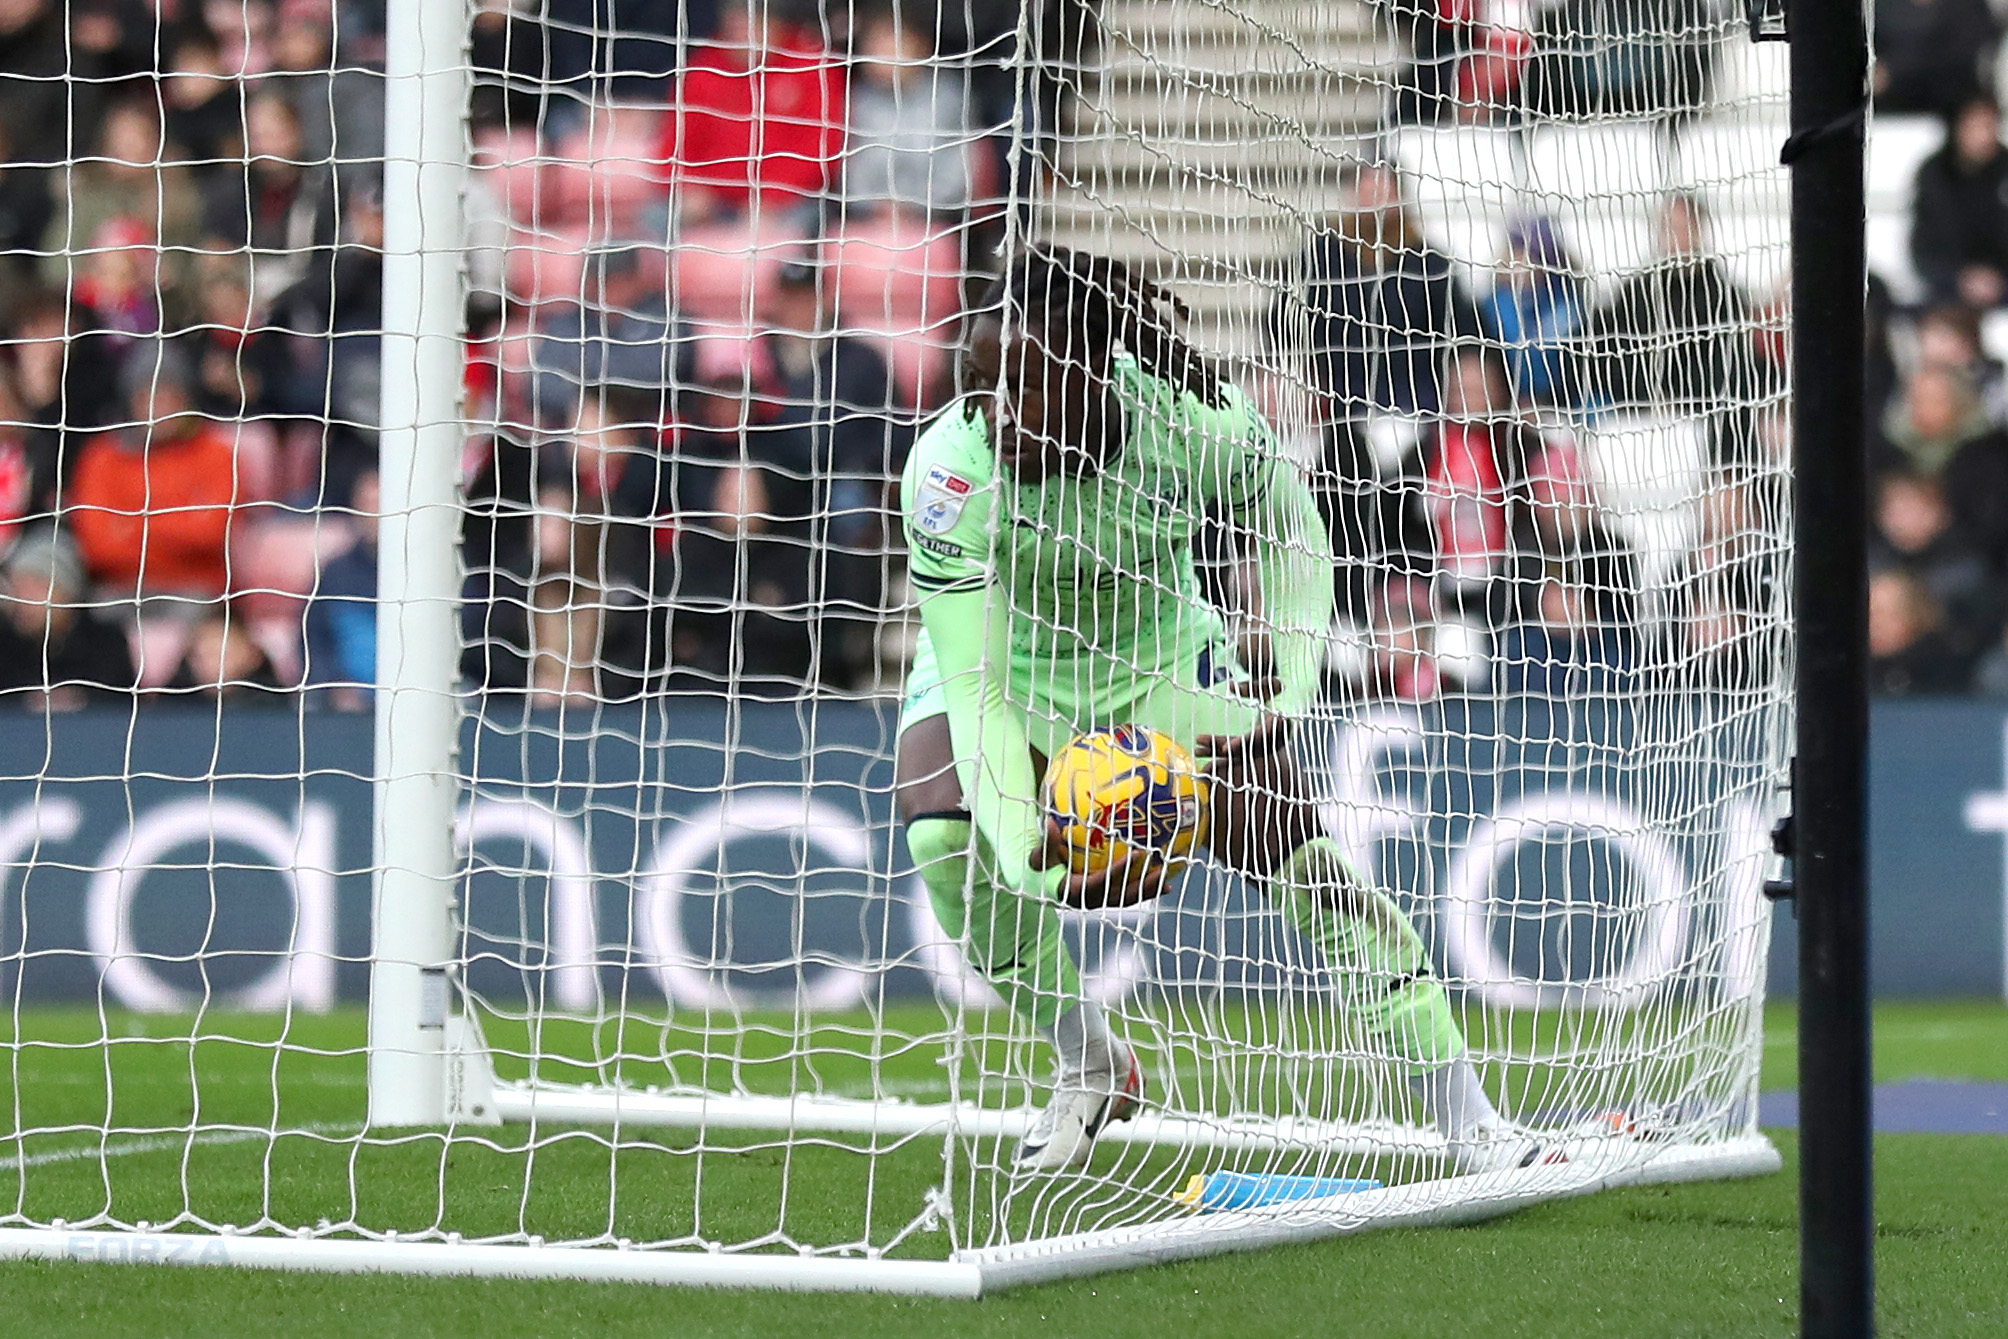 Brandon Thomas-Asante picking the ball out of the back of the net at the Stadium of Light after scoring against Sunderland while wearing the lime green away kit